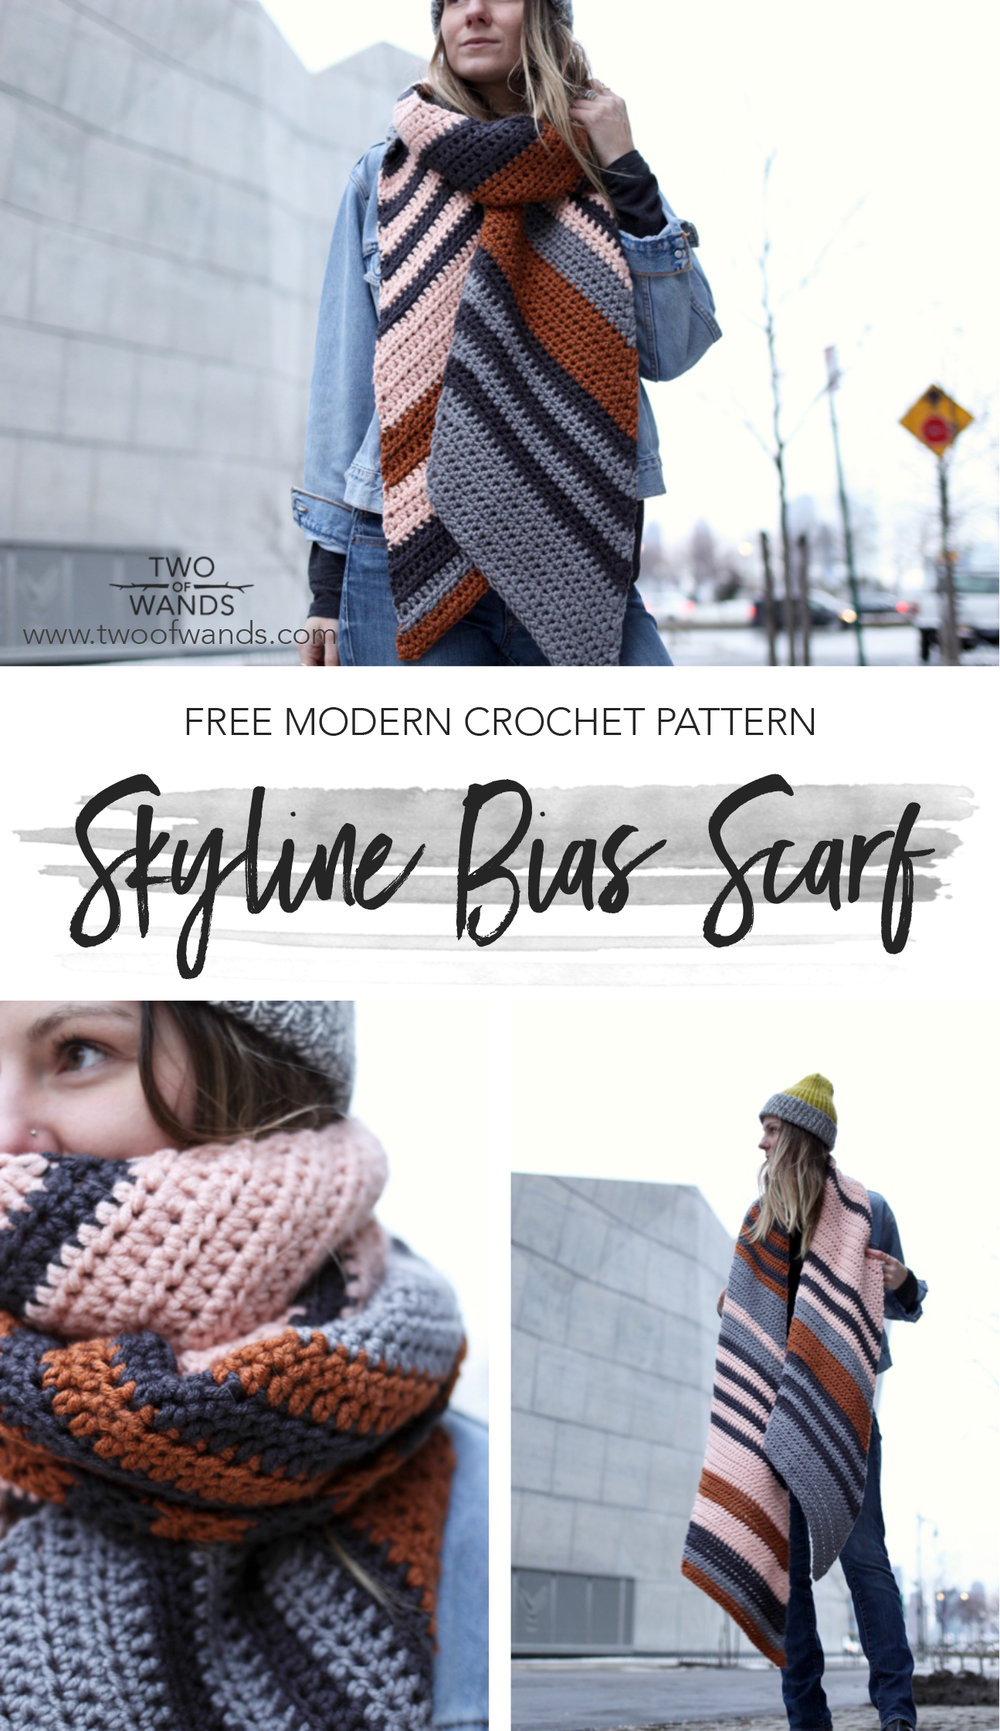 Skyline Bias Scarf pattern by Two of Wands